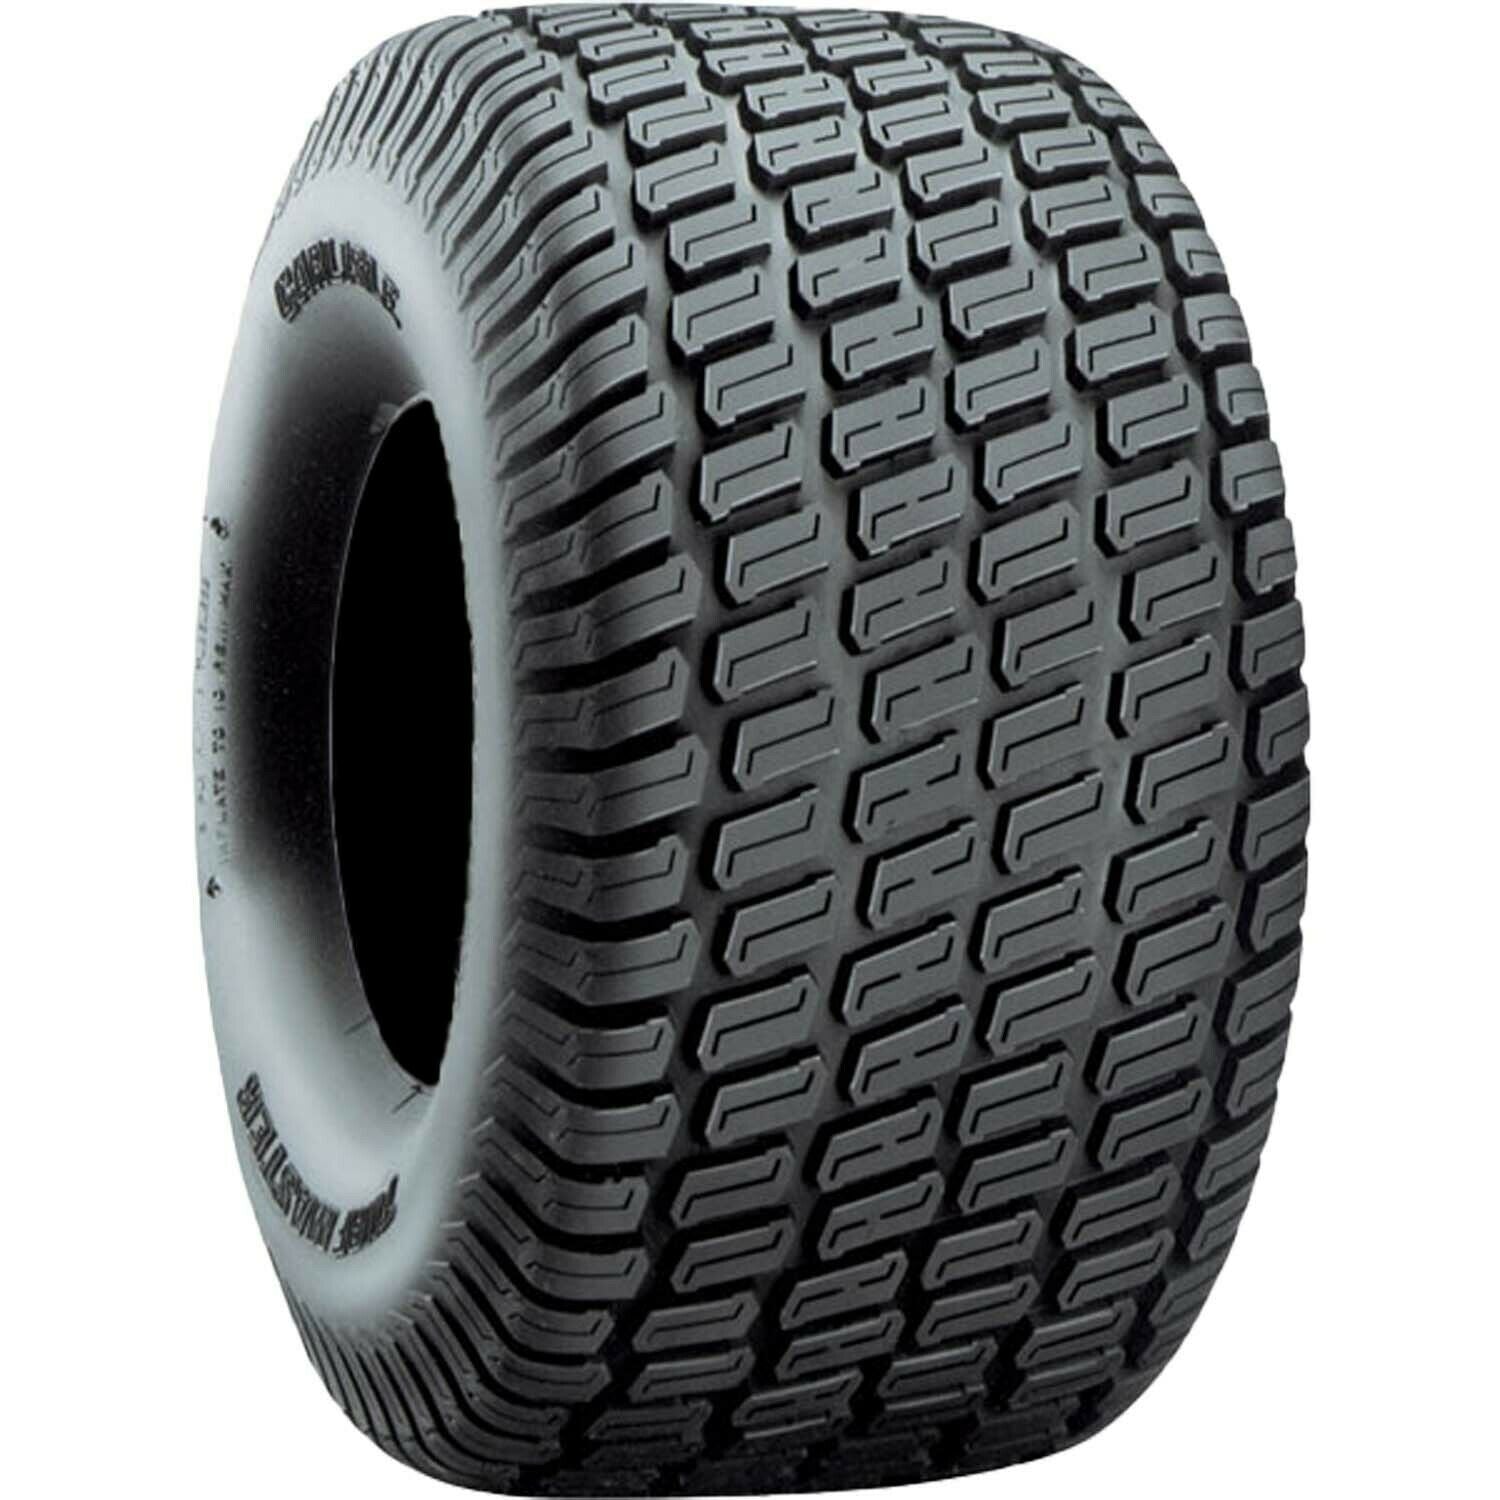 Carlisle Turf Master Lawn and Garden Tire 4Ply 23x8.50-12